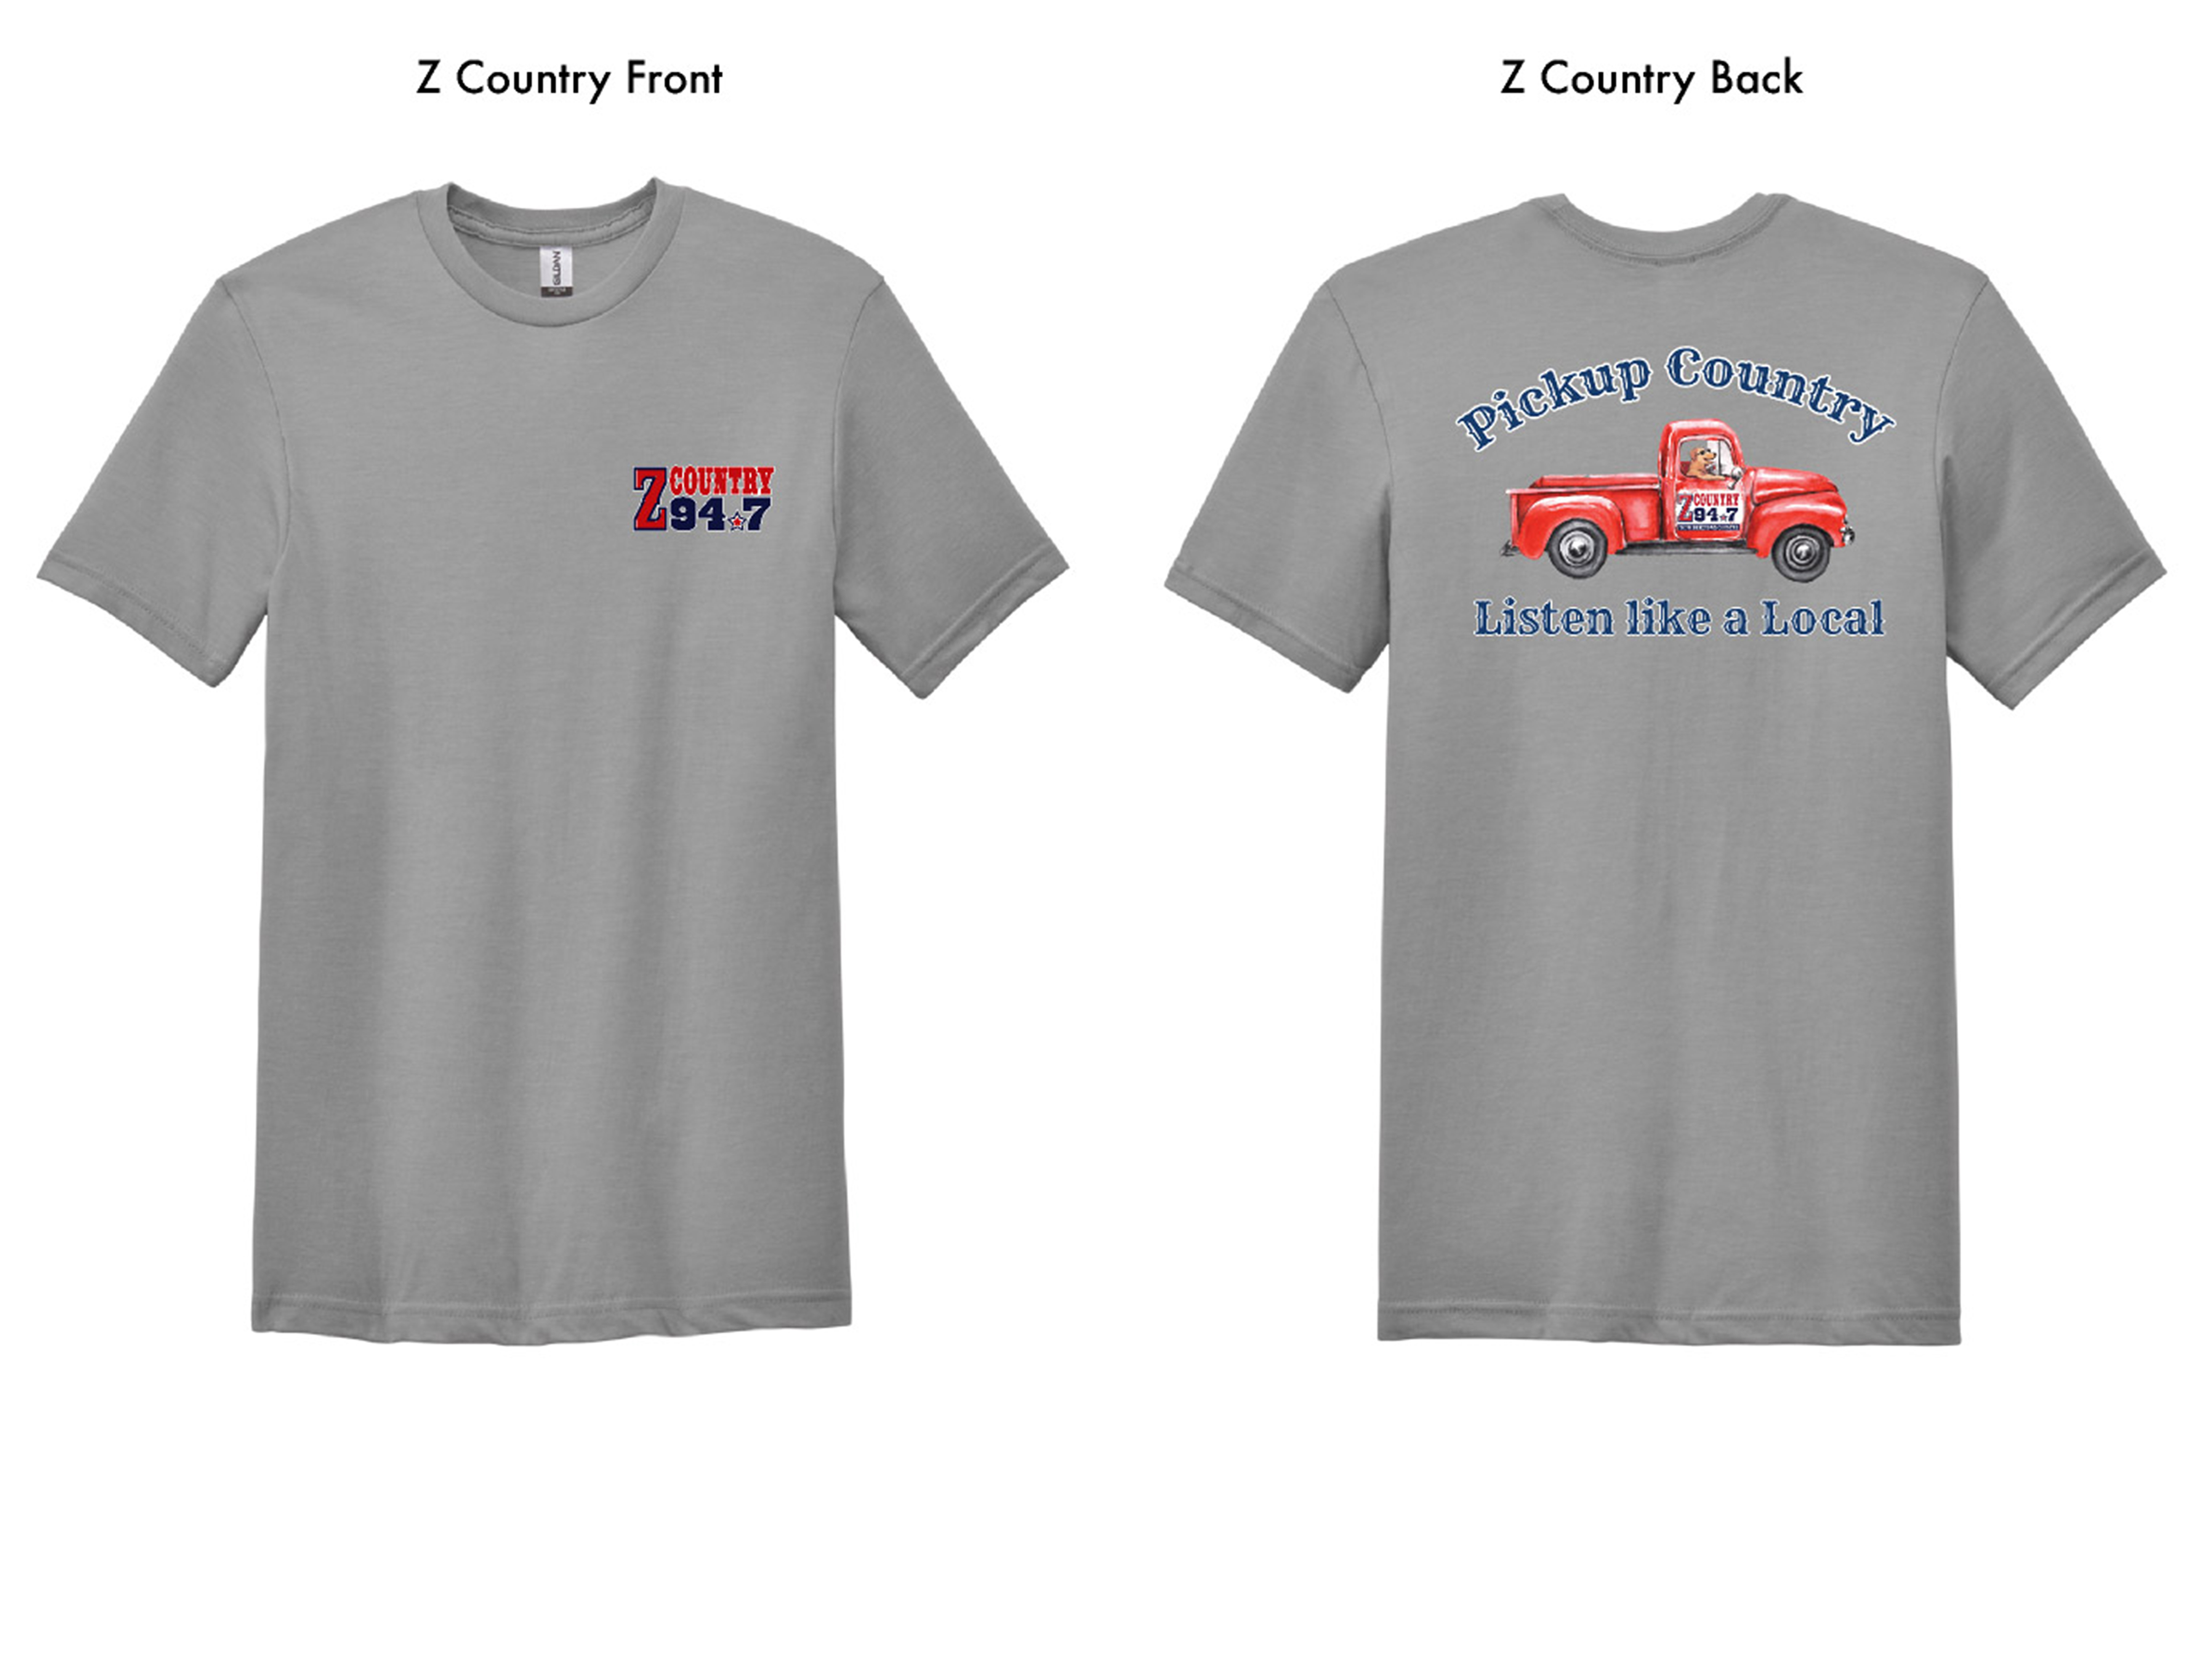 ZCountry947 "Hometown Country" T-Shirt